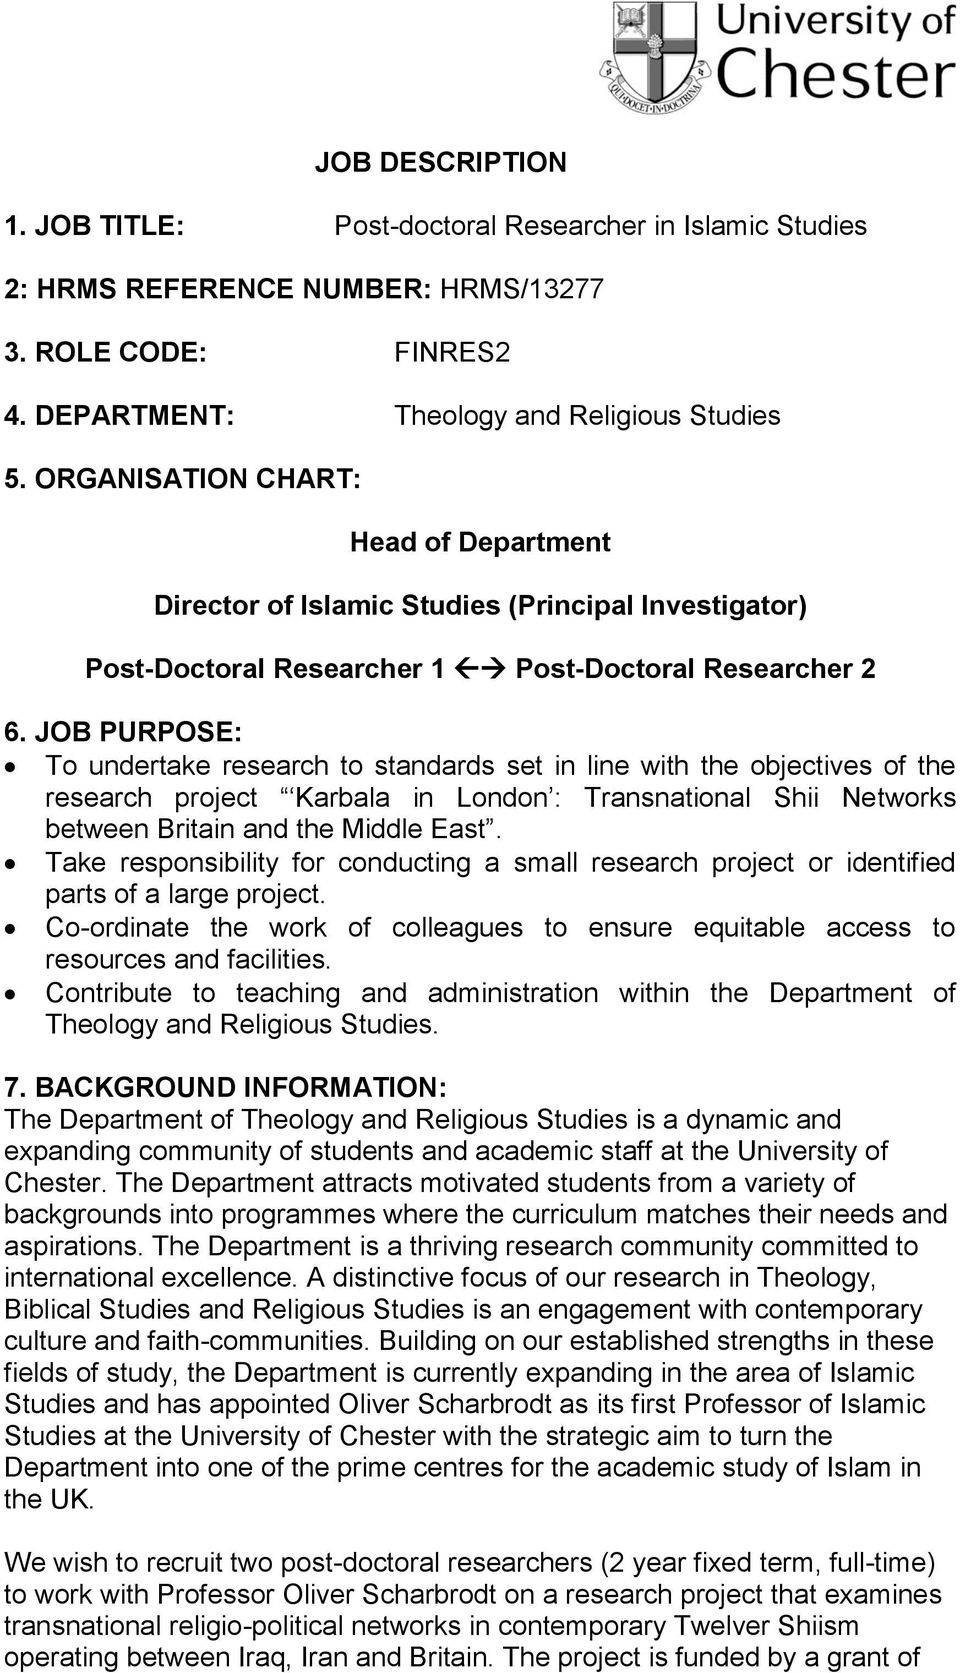 JOB PURPOSE: To undertake research to standards set in line with the objectives of the research project Karbala in London : Transnational Shii Networks between Britain and the Middle East.